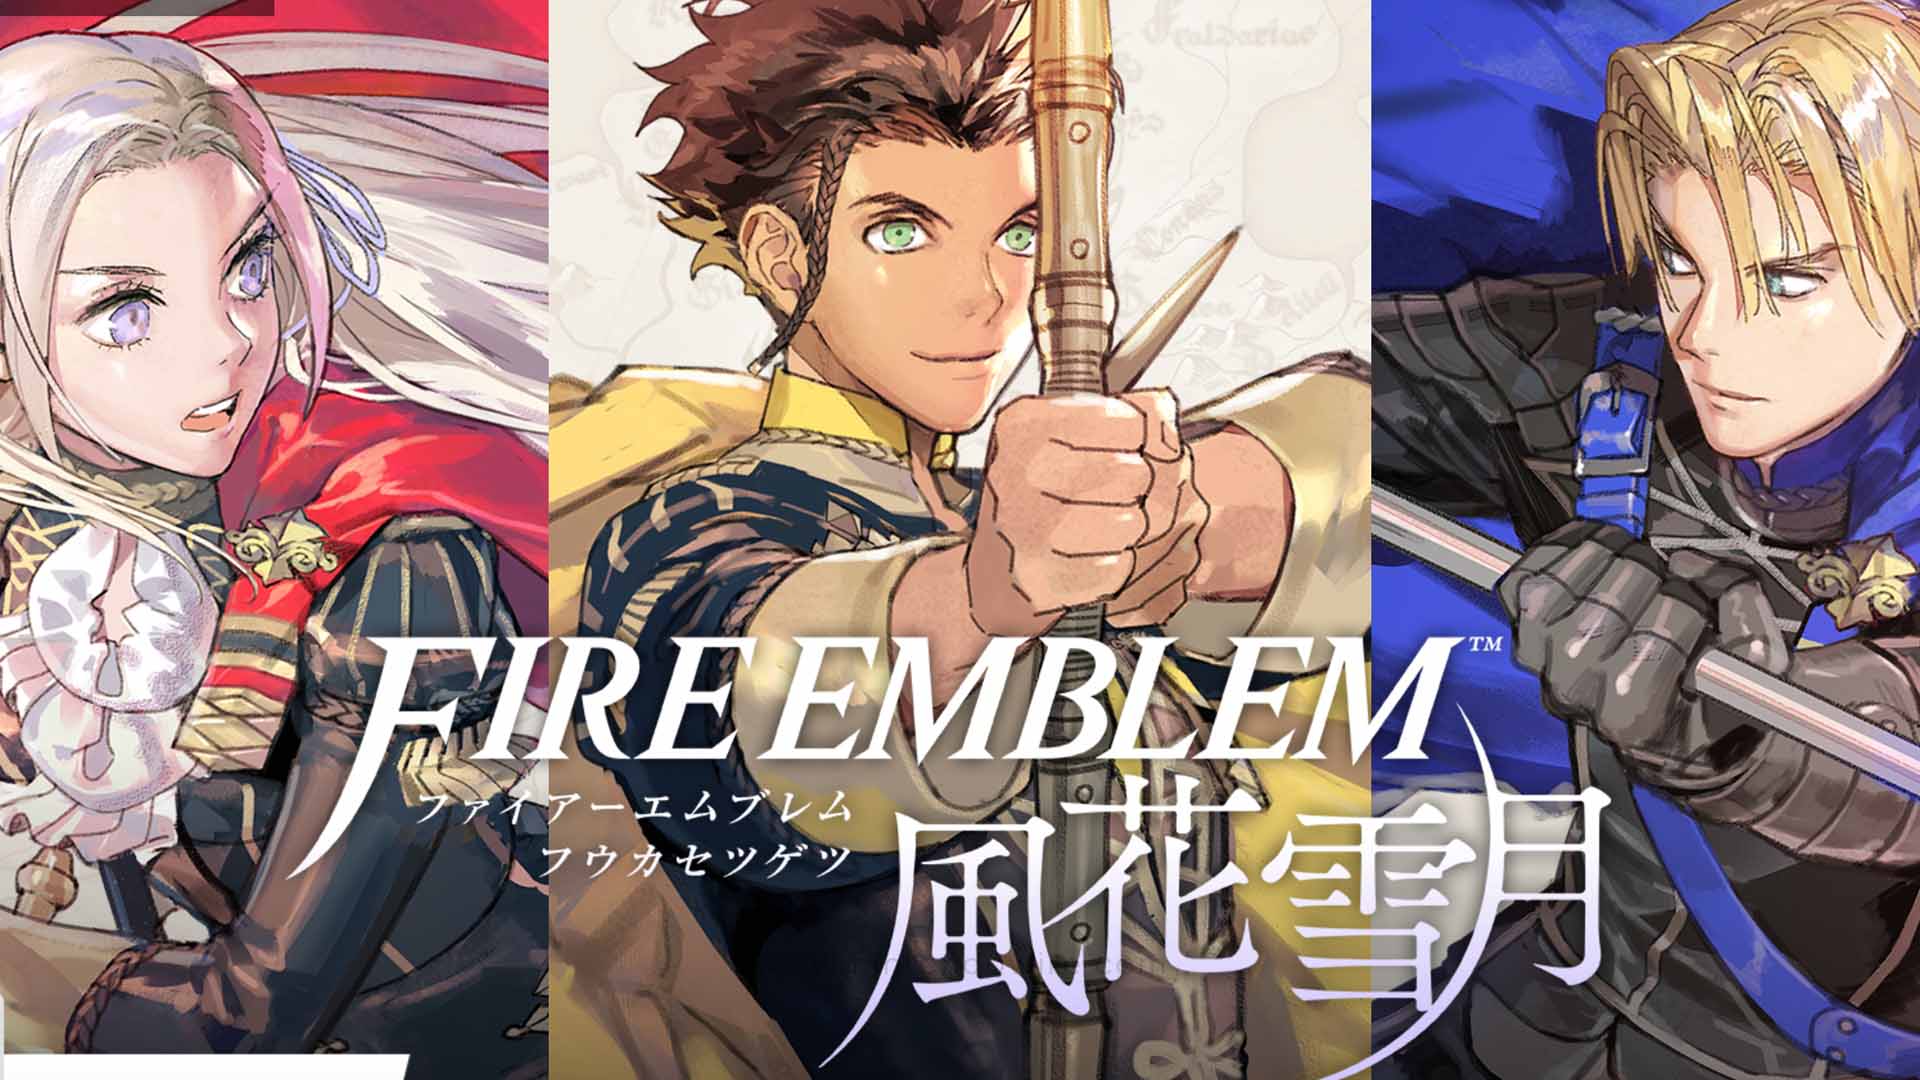 Fire Emblem: Three Houses Japanese website now in session. Nintendo